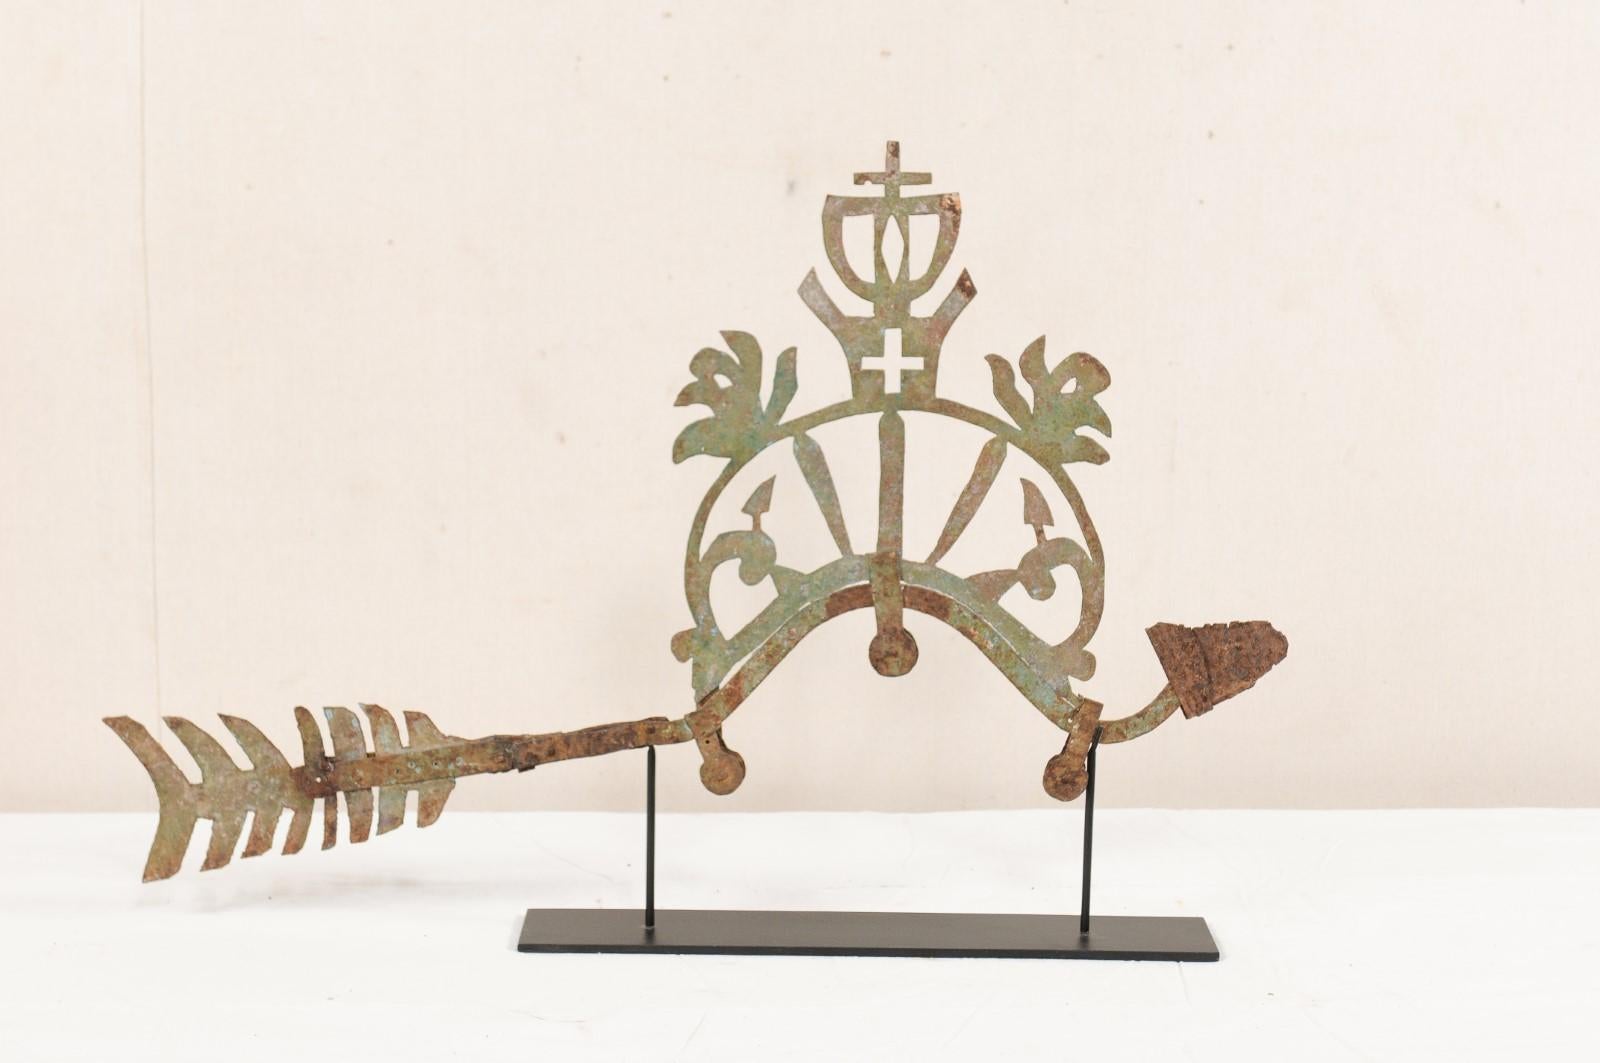 An ornamental bird fragment from the 19th century presented on stand. This antique decorative metal piece from Indonesia features a bird with crown and cross motif at its center, which has been displayed on a custom black iron stand. The old metal